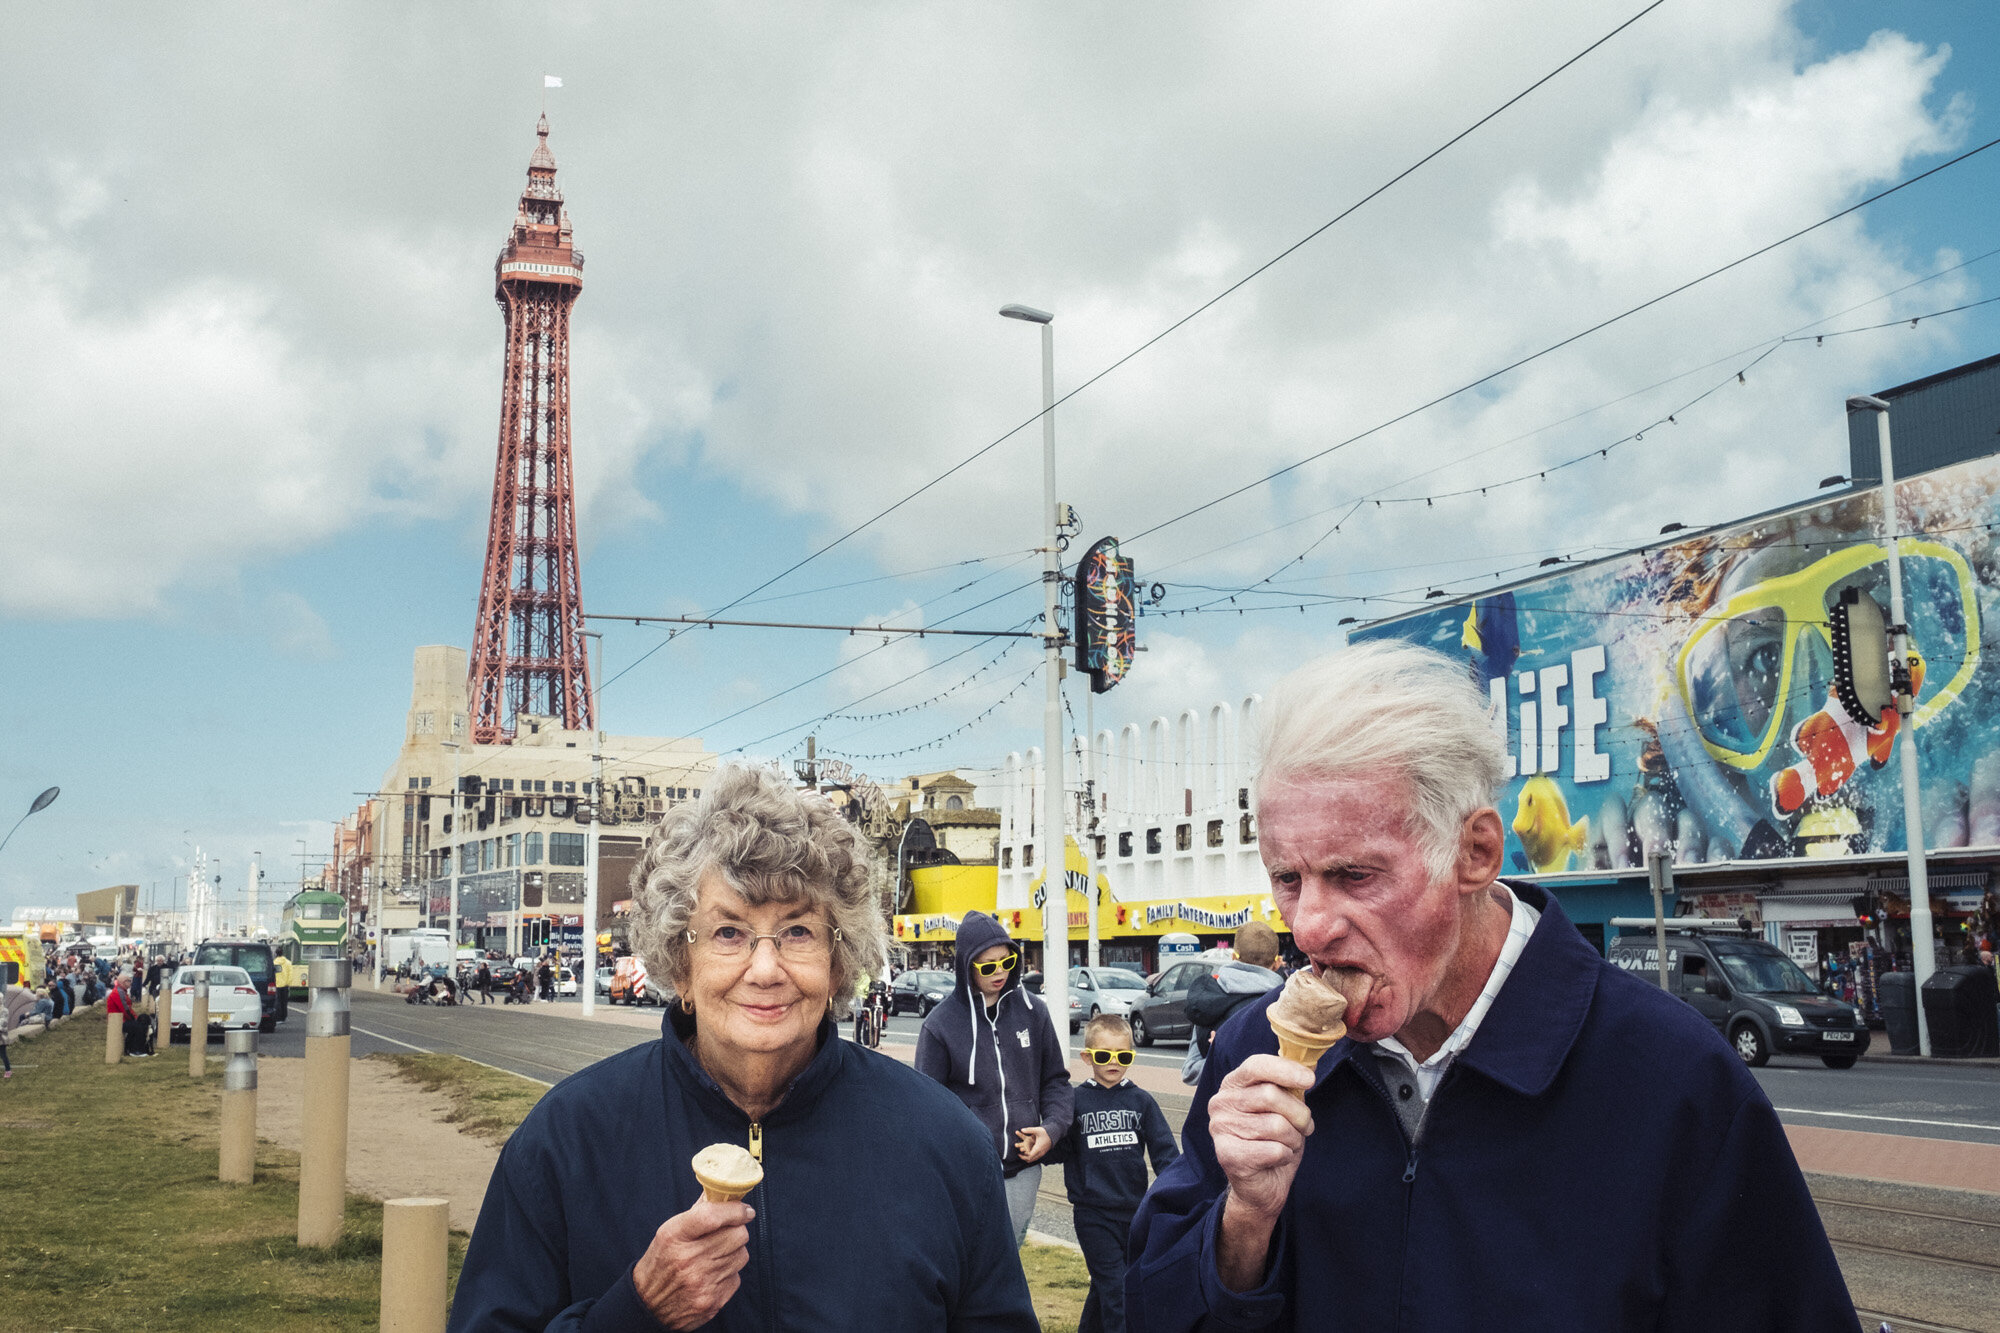 BLACKPOOL - BREXIT VACATIONS